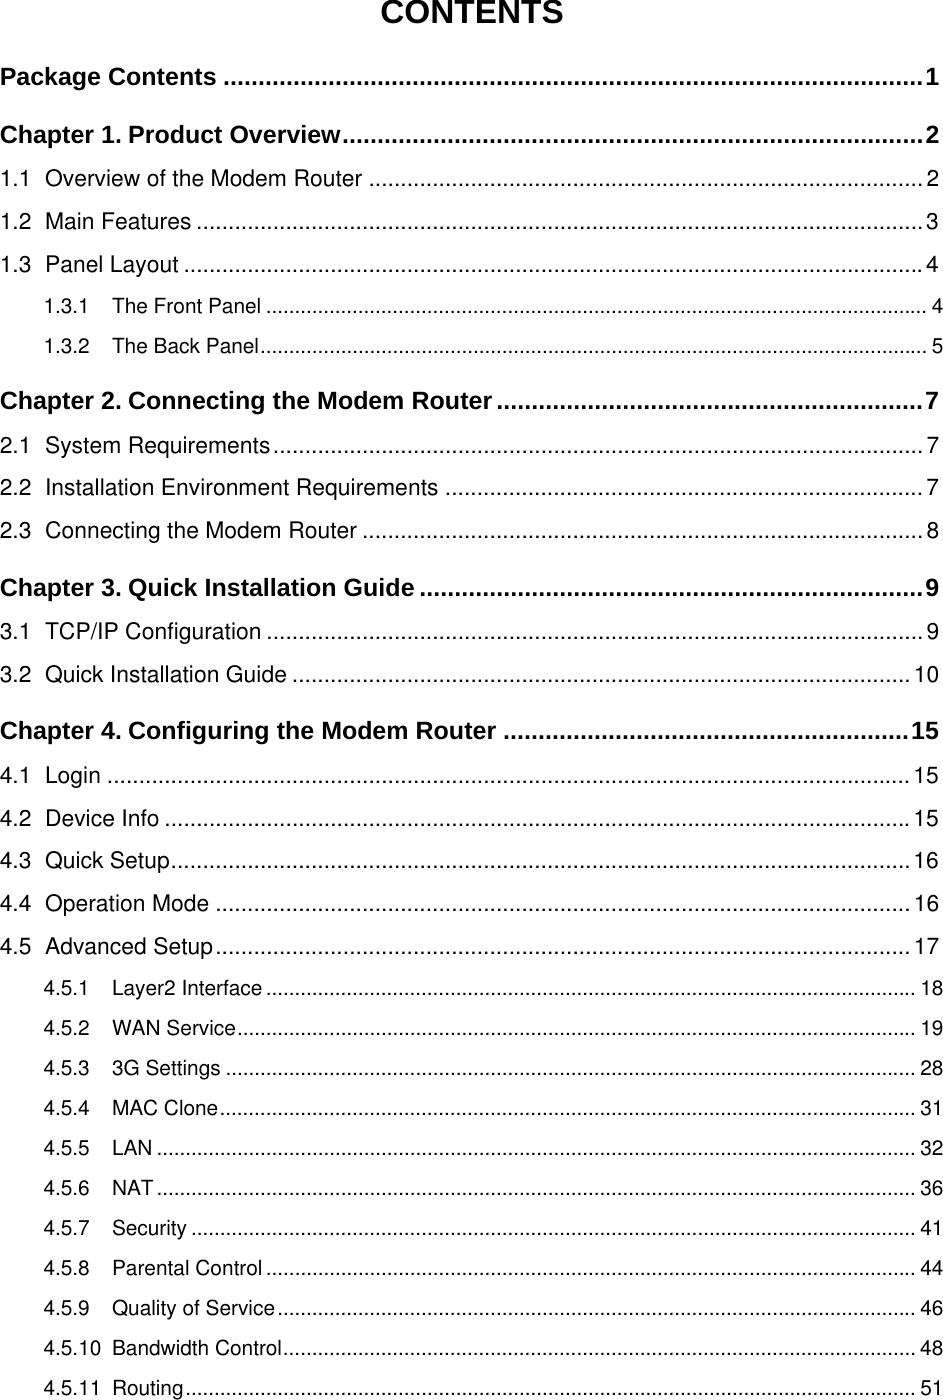  CONTENTS Package Contents ....................................................................................................1 Chapter 1. Product Overview...................................................................................2 1.1 Overview of the Modem Router .......................................................................................2 1.2 Main Features ..................................................................................................................3 1.3 Panel Layout ....................................................................................................................4 1.3.1 The Front Panel ................................................................................................................... 4 1.3.2 The Back Panel.................................................................................................................... 5 Chapter 2. Connecting the Modem Router.............................................................7 2.1 System Requirements......................................................................................................7 2.2 Installation Environment Requirements ........................................................................... 7 2.3 Connecting the Modem Router ........................................................................................8 Chapter 3. Quick Installation Guide ........................................................................9 3.1 TCP/IP Configuration .......................................................................................................9 3.2 Quick Installation Guide ................................................................................................. 10 Chapter 4. Configuring the Modem Router ..........................................................15 4.1 Login ..............................................................................................................................15 4.2 Device Info .....................................................................................................................15 4.3 Quick Setup....................................................................................................................16 4.4 Operation Mode .............................................................................................................16 4.5 Advanced Setup.............................................................................................................17 4.5.1 Layer2 Interface ................................................................................................................. 18 4.5.2 WAN Service...................................................................................................................... 19 4.5.3 3G Settings ........................................................................................................................ 28 4.5.4 MAC Clone......................................................................................................................... 31 4.5.5 LAN .................................................................................................................................... 32 4.5.6 NAT.................................................................................................................................... 36 4.5.7 Security .............................................................................................................................. 41 4.5.8 Parental Control ................................................................................................................. 44 4.5.9 Quality of Service............................................................................................................... 46 4.5.10 Bandwidth Control.............................................................................................................. 48 4.5.11 Routing............................................................................................................................... 51  